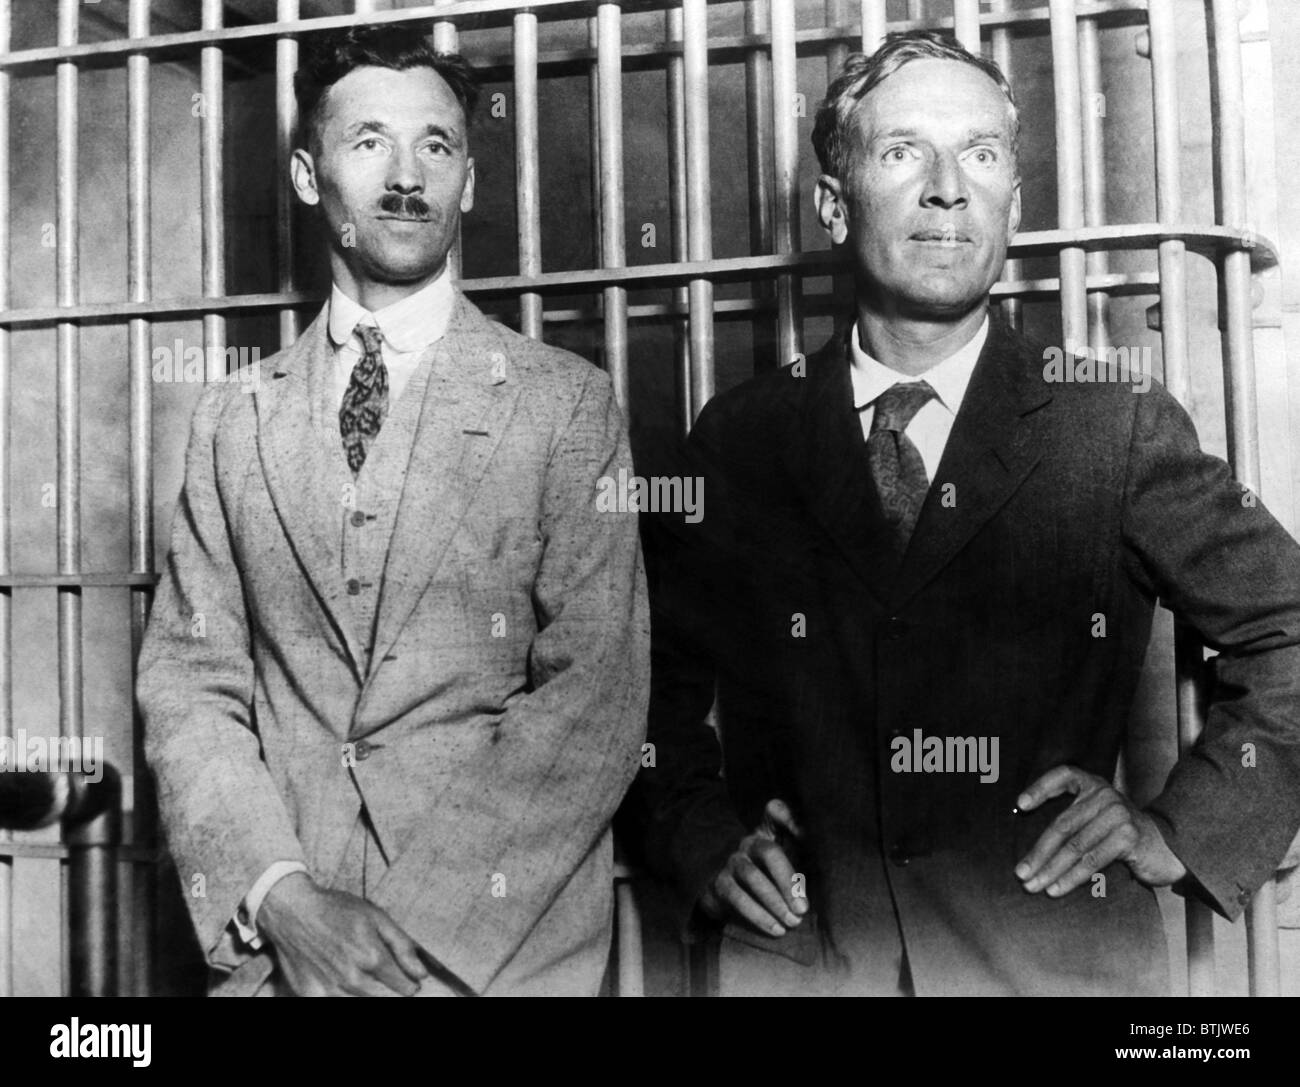 Wealthy radical Prince Hopkins and American novelist Upton Sinclair, in a Los Angeles prison after being arrested for being radi Stock Photo